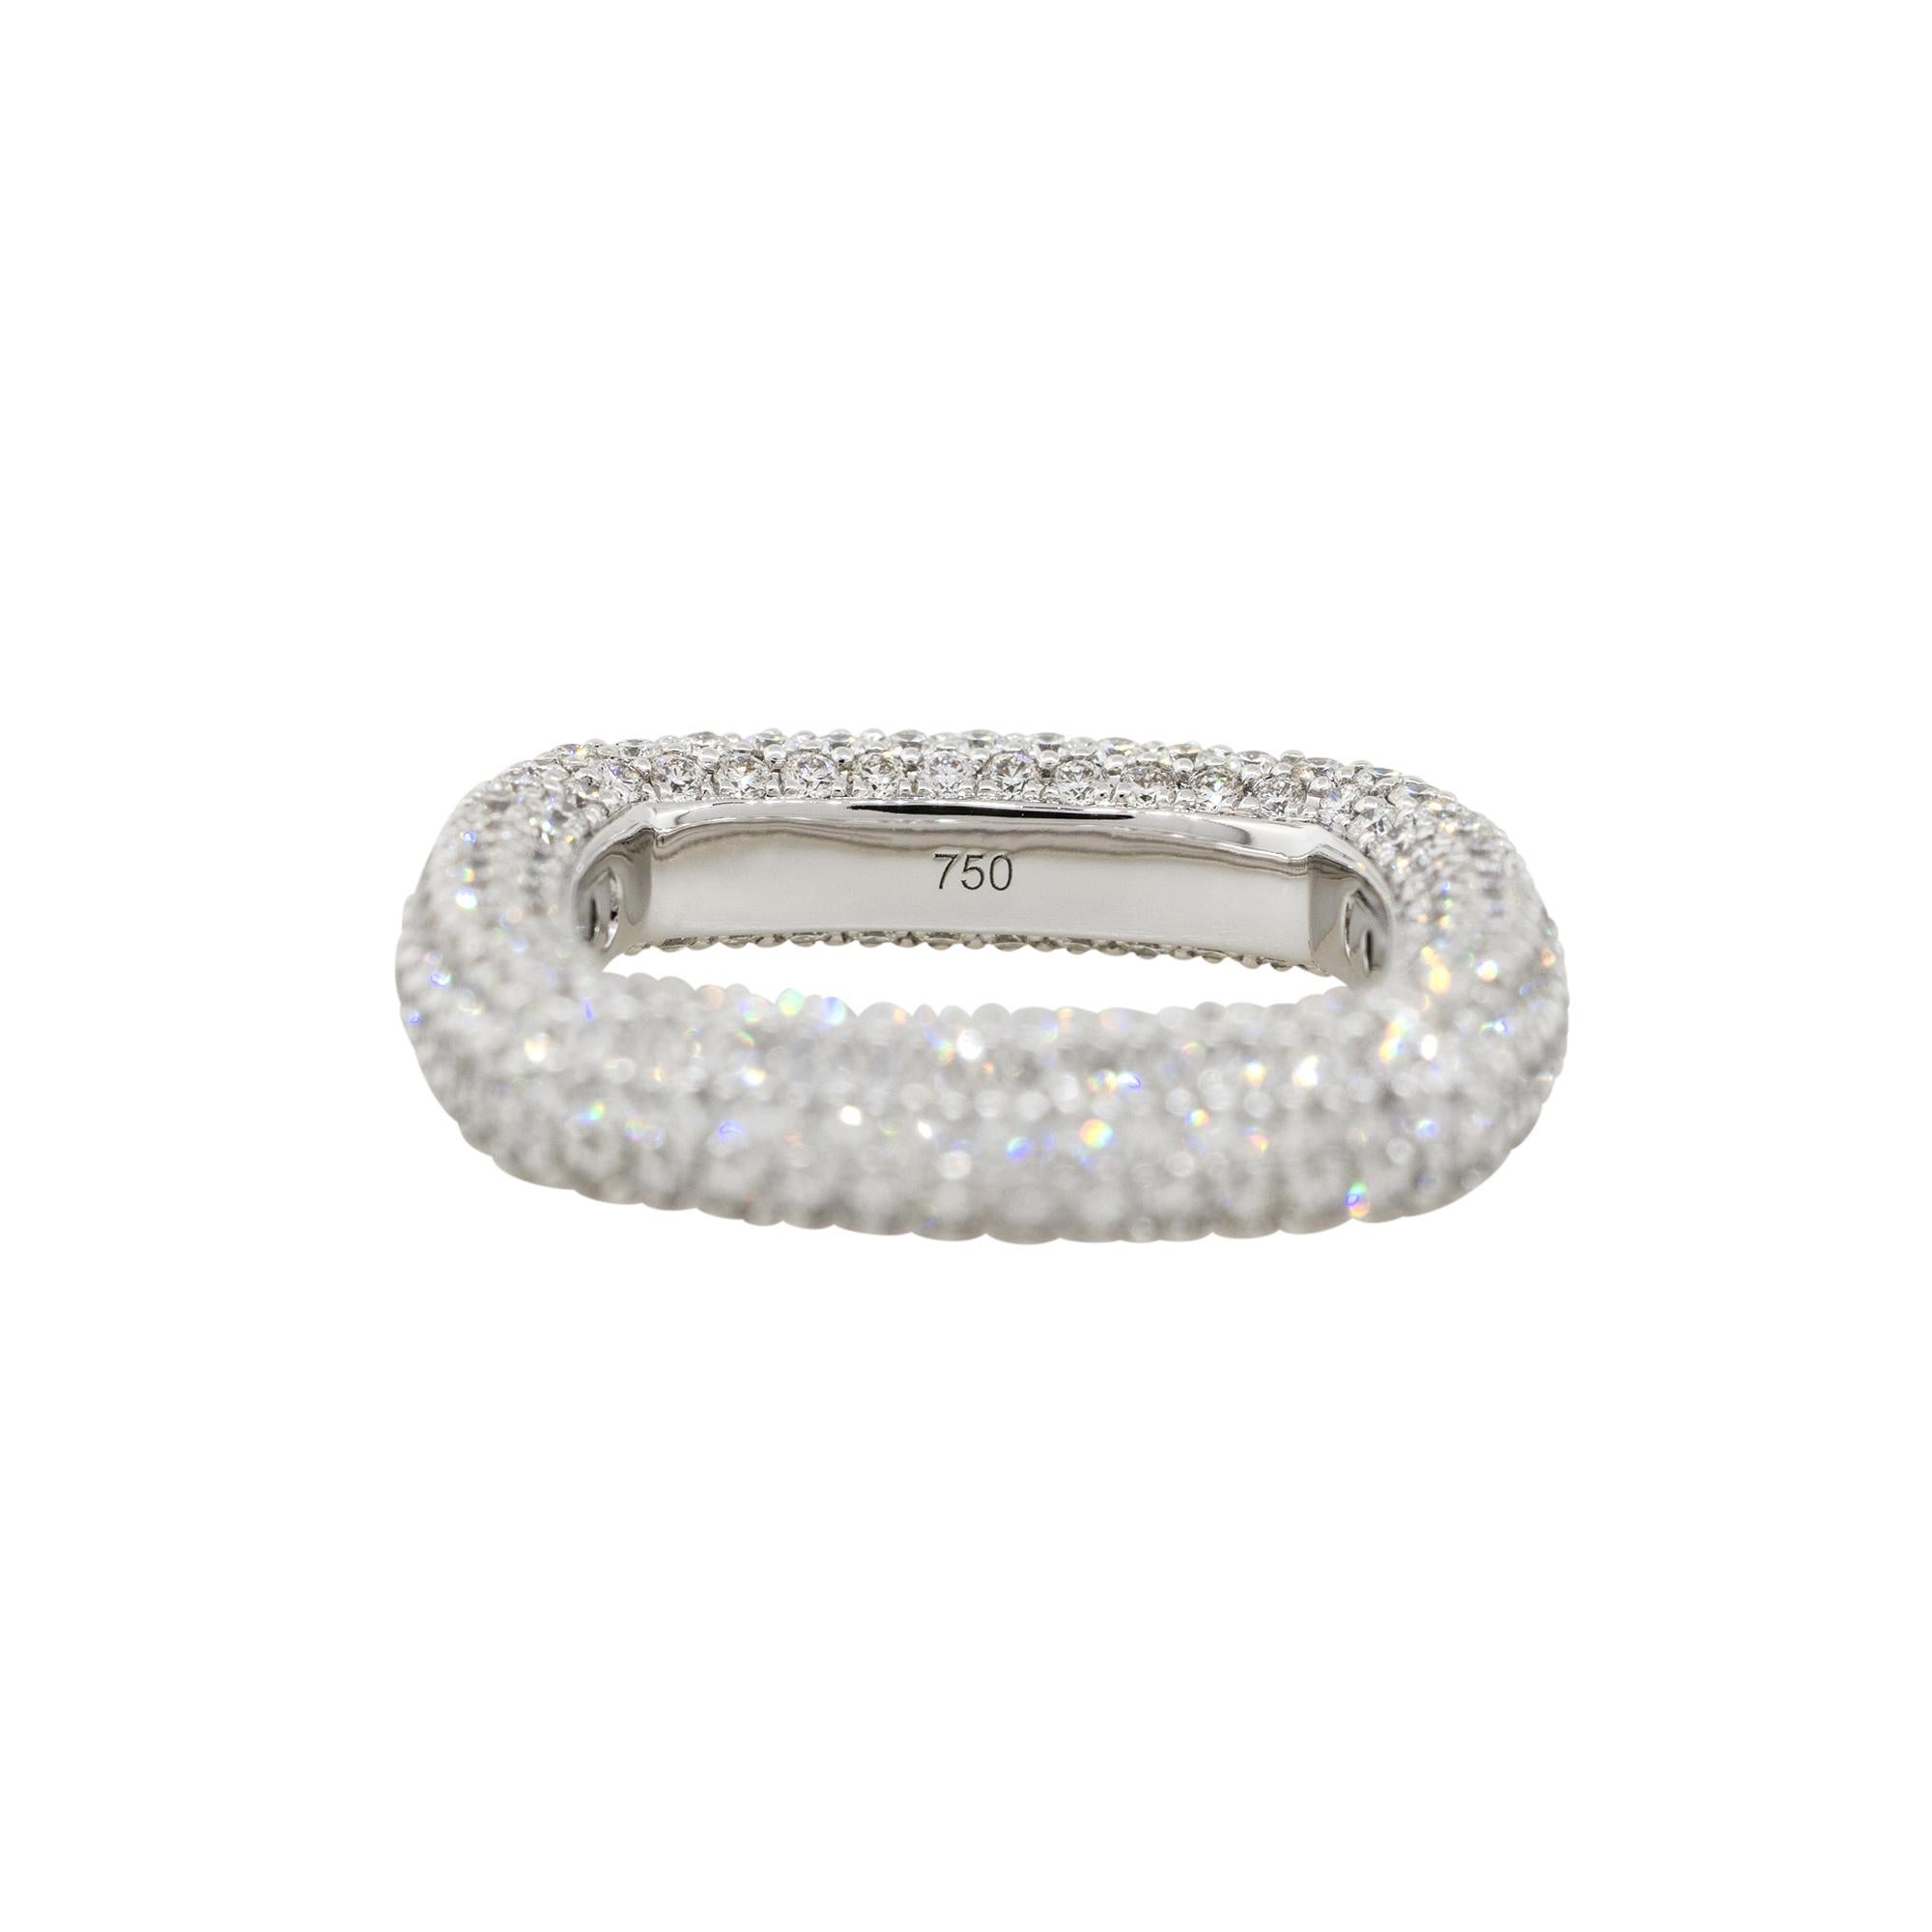 Material: 18k white gold
Diamond details: Approx. 3.28ctw of round cut diamonds. Diamonds are G/H in color and VS in clarity
Ring Size: 6.5
Total Weight: 7.2g (4.6dwt)
Measurements: 1